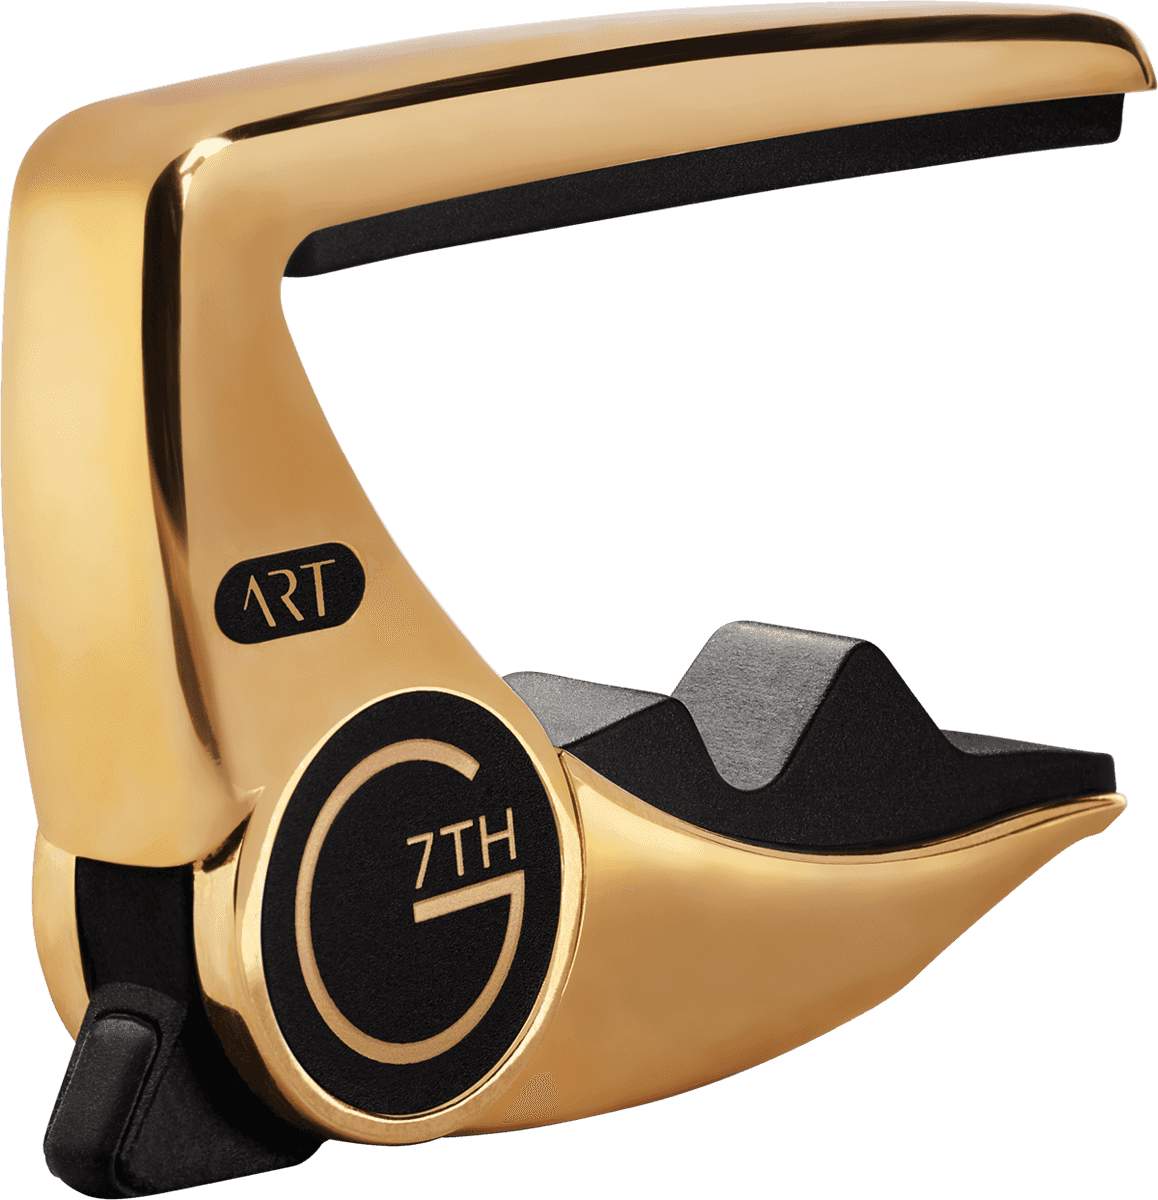 G7th Performance 3 Steel String 18kt Gold-plate - Capo - Variation 1